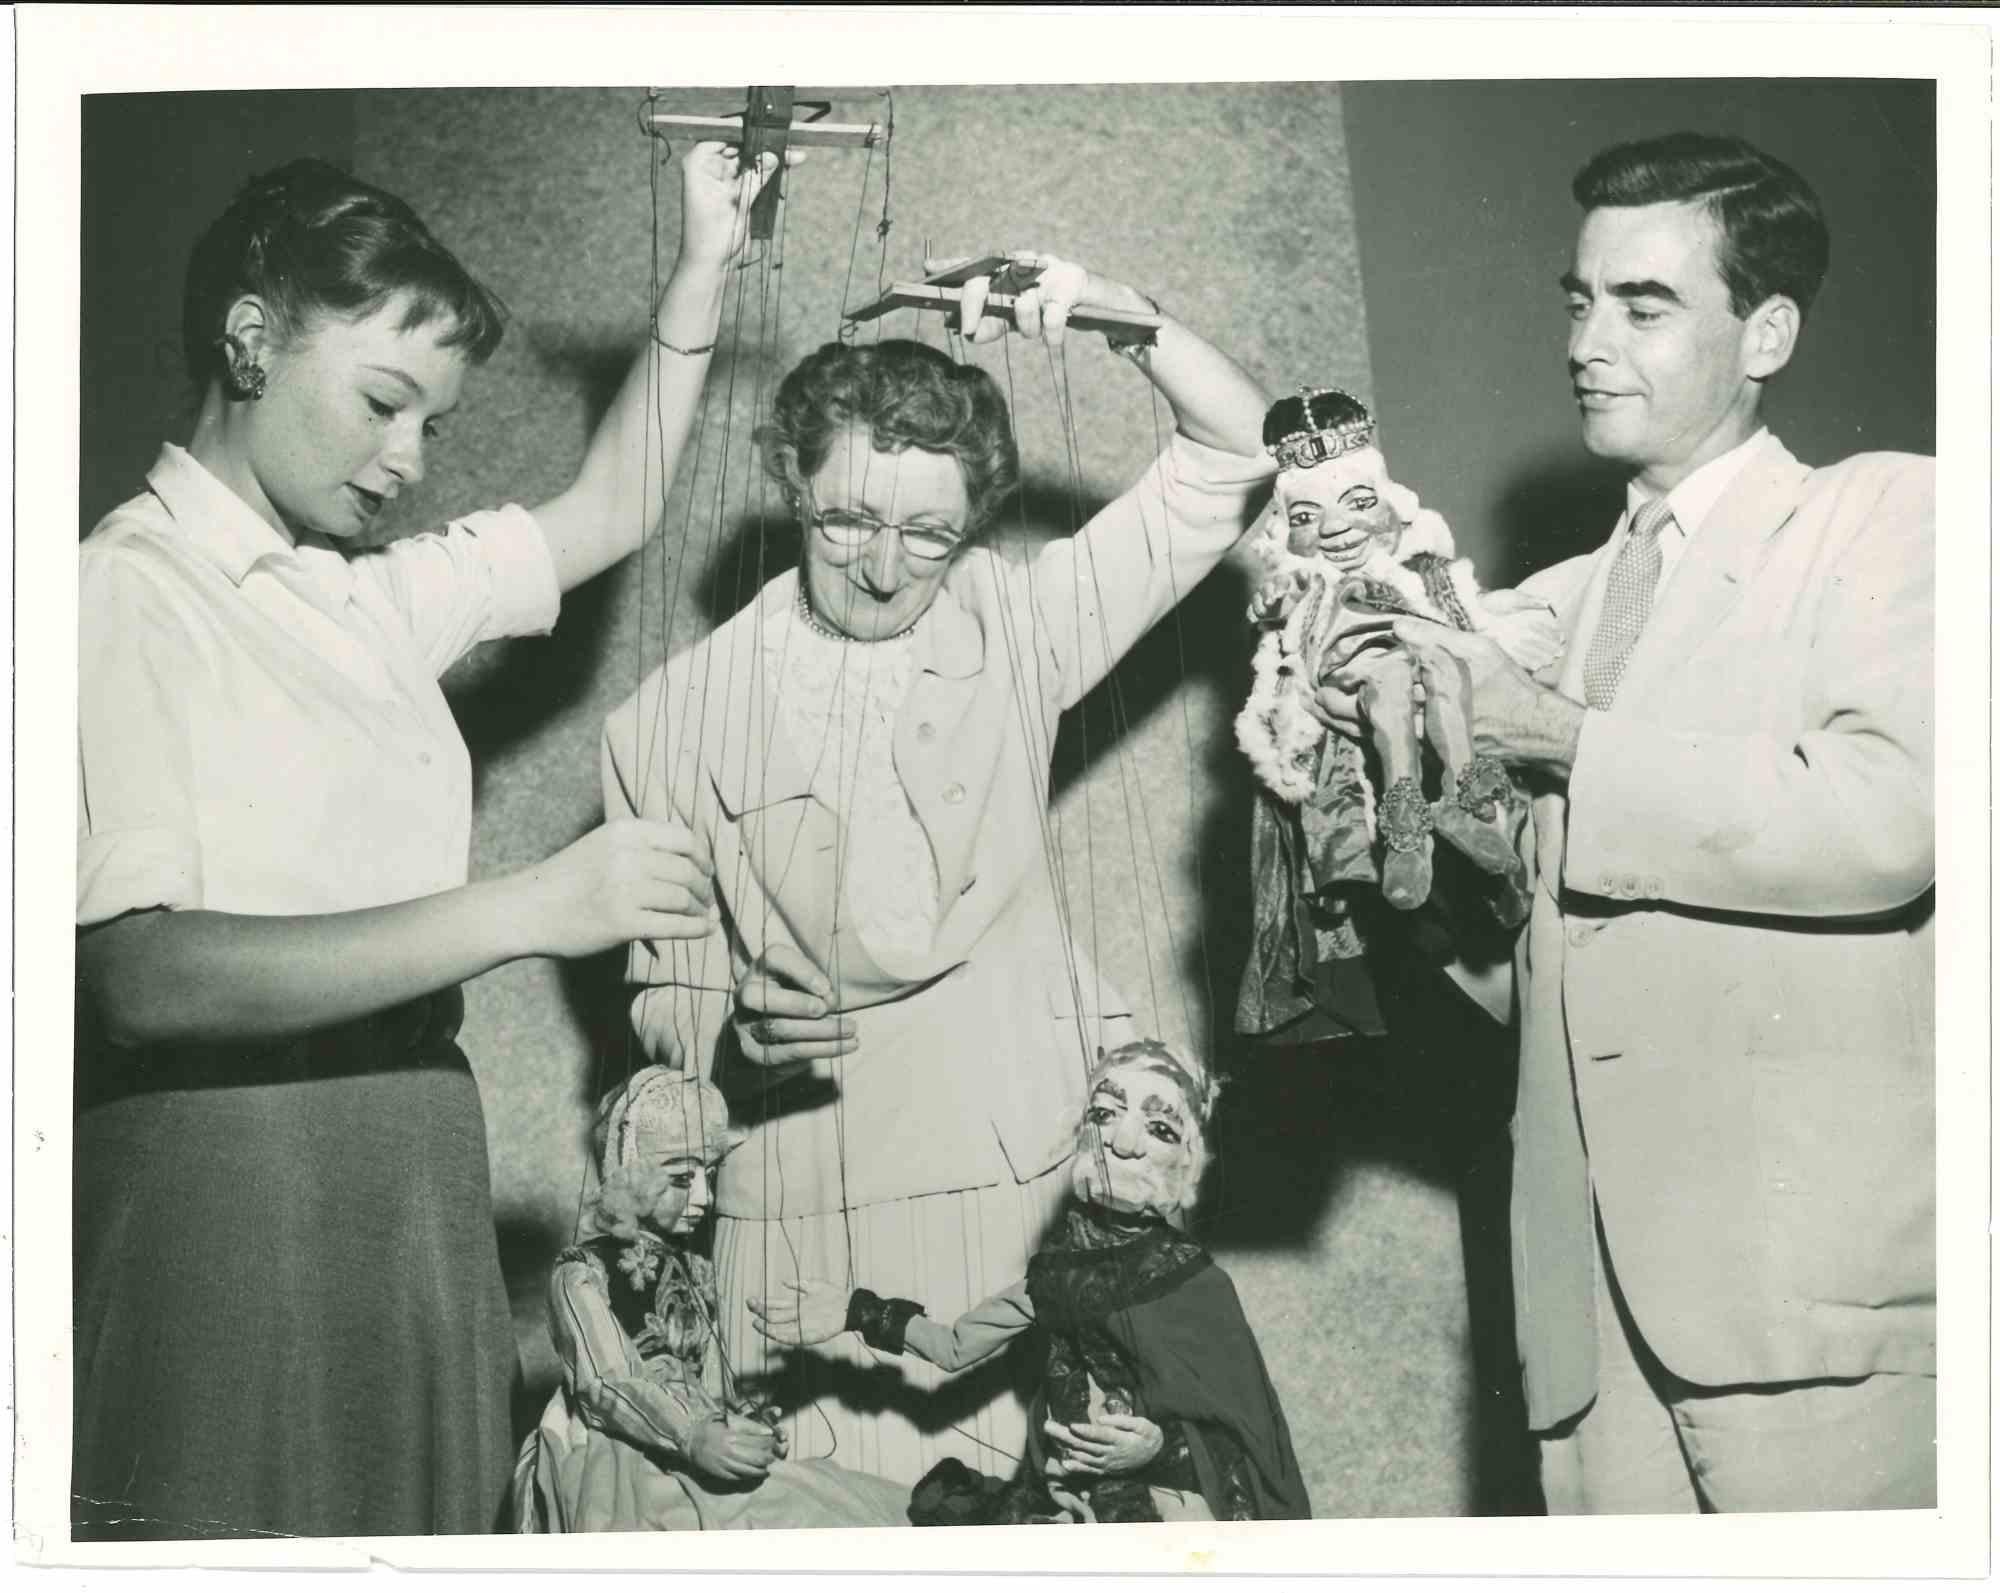 Unknown Figurative Photograph - Puppets - American Vintage Photograph - Mid 20th Century